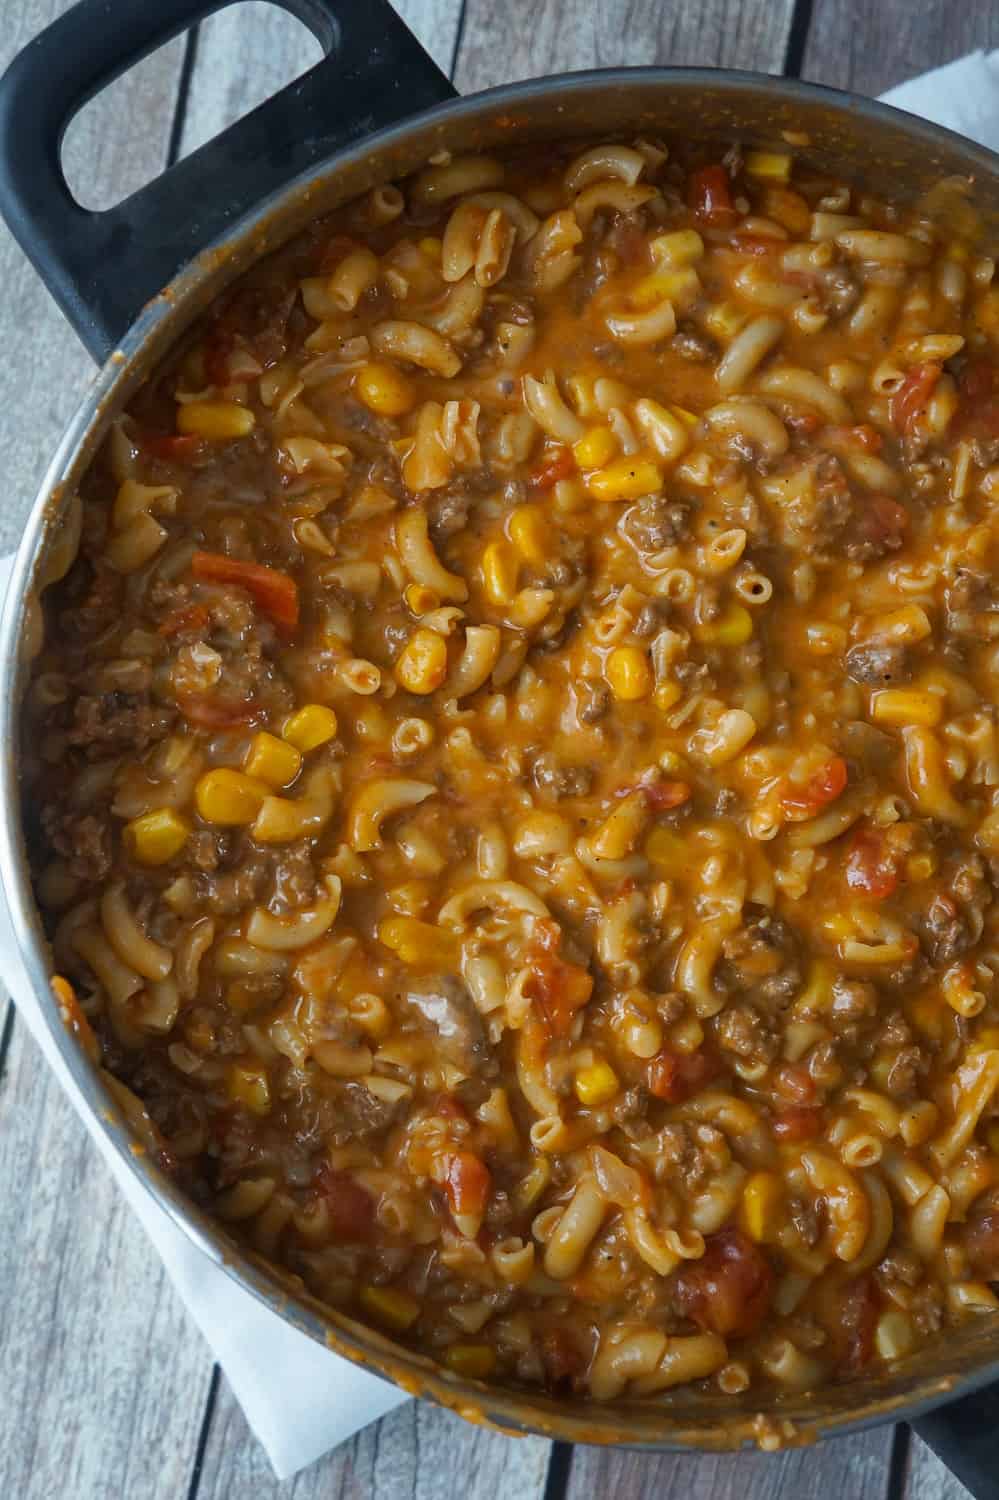 Cheesy Beef Goulash with Corn is an easy weeknight dinner recipe that takes less than 30 minutes from start to finish. This one pot dinner is loaded with diced tomatoes, macaroni noodles, ground beef corn and mozzarella cheese.